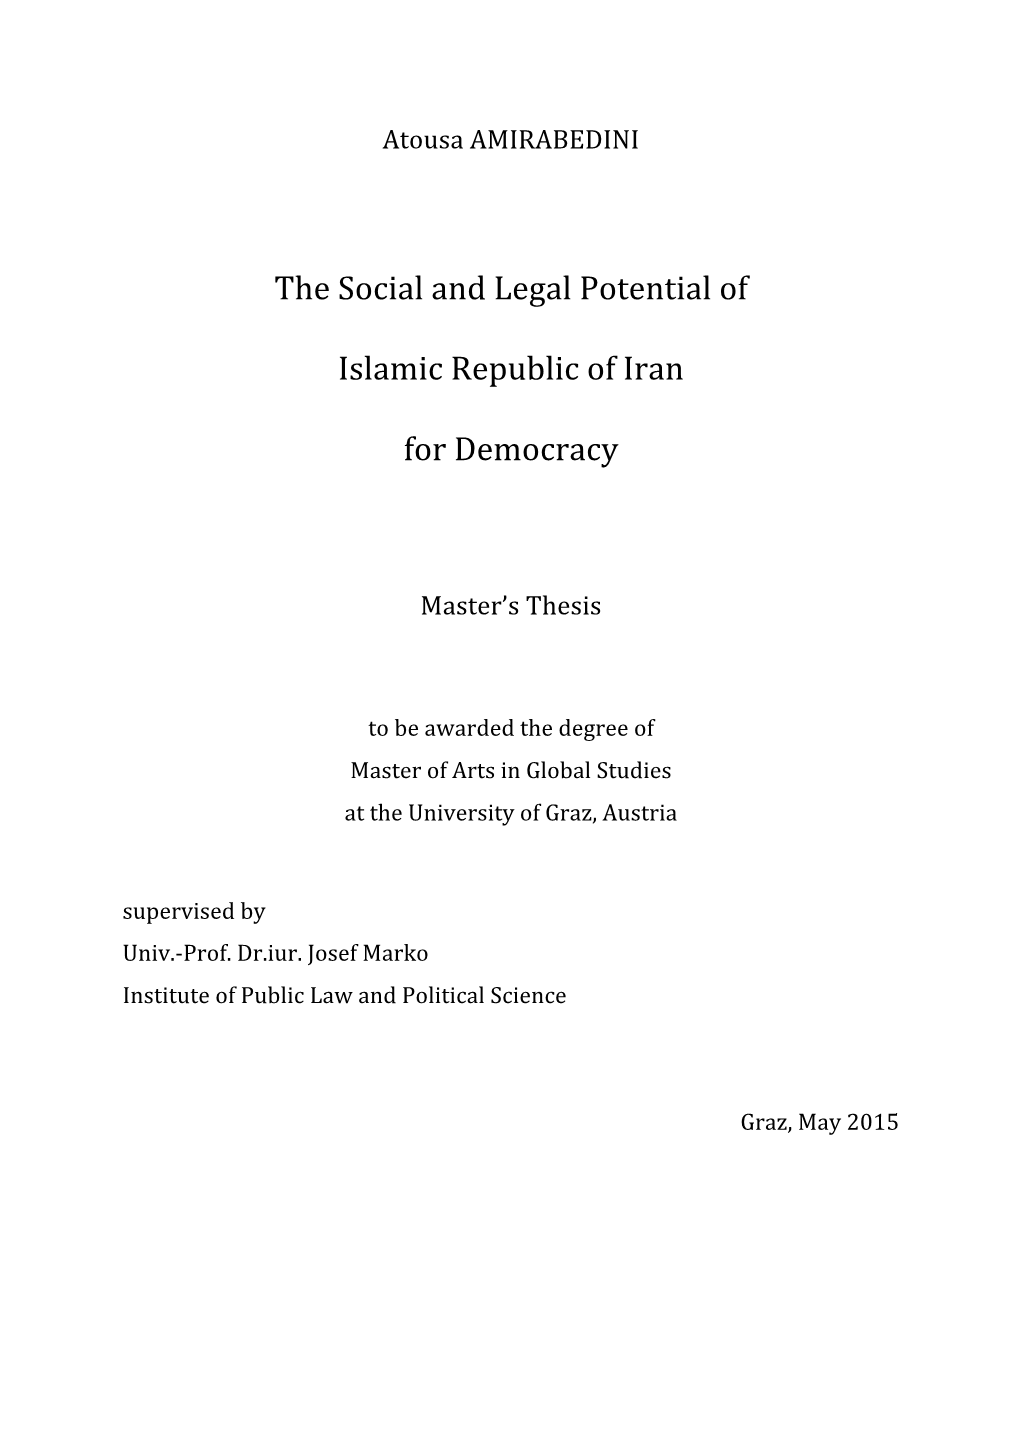 The Social and Legal Potential of Islamic Republic of Iran For